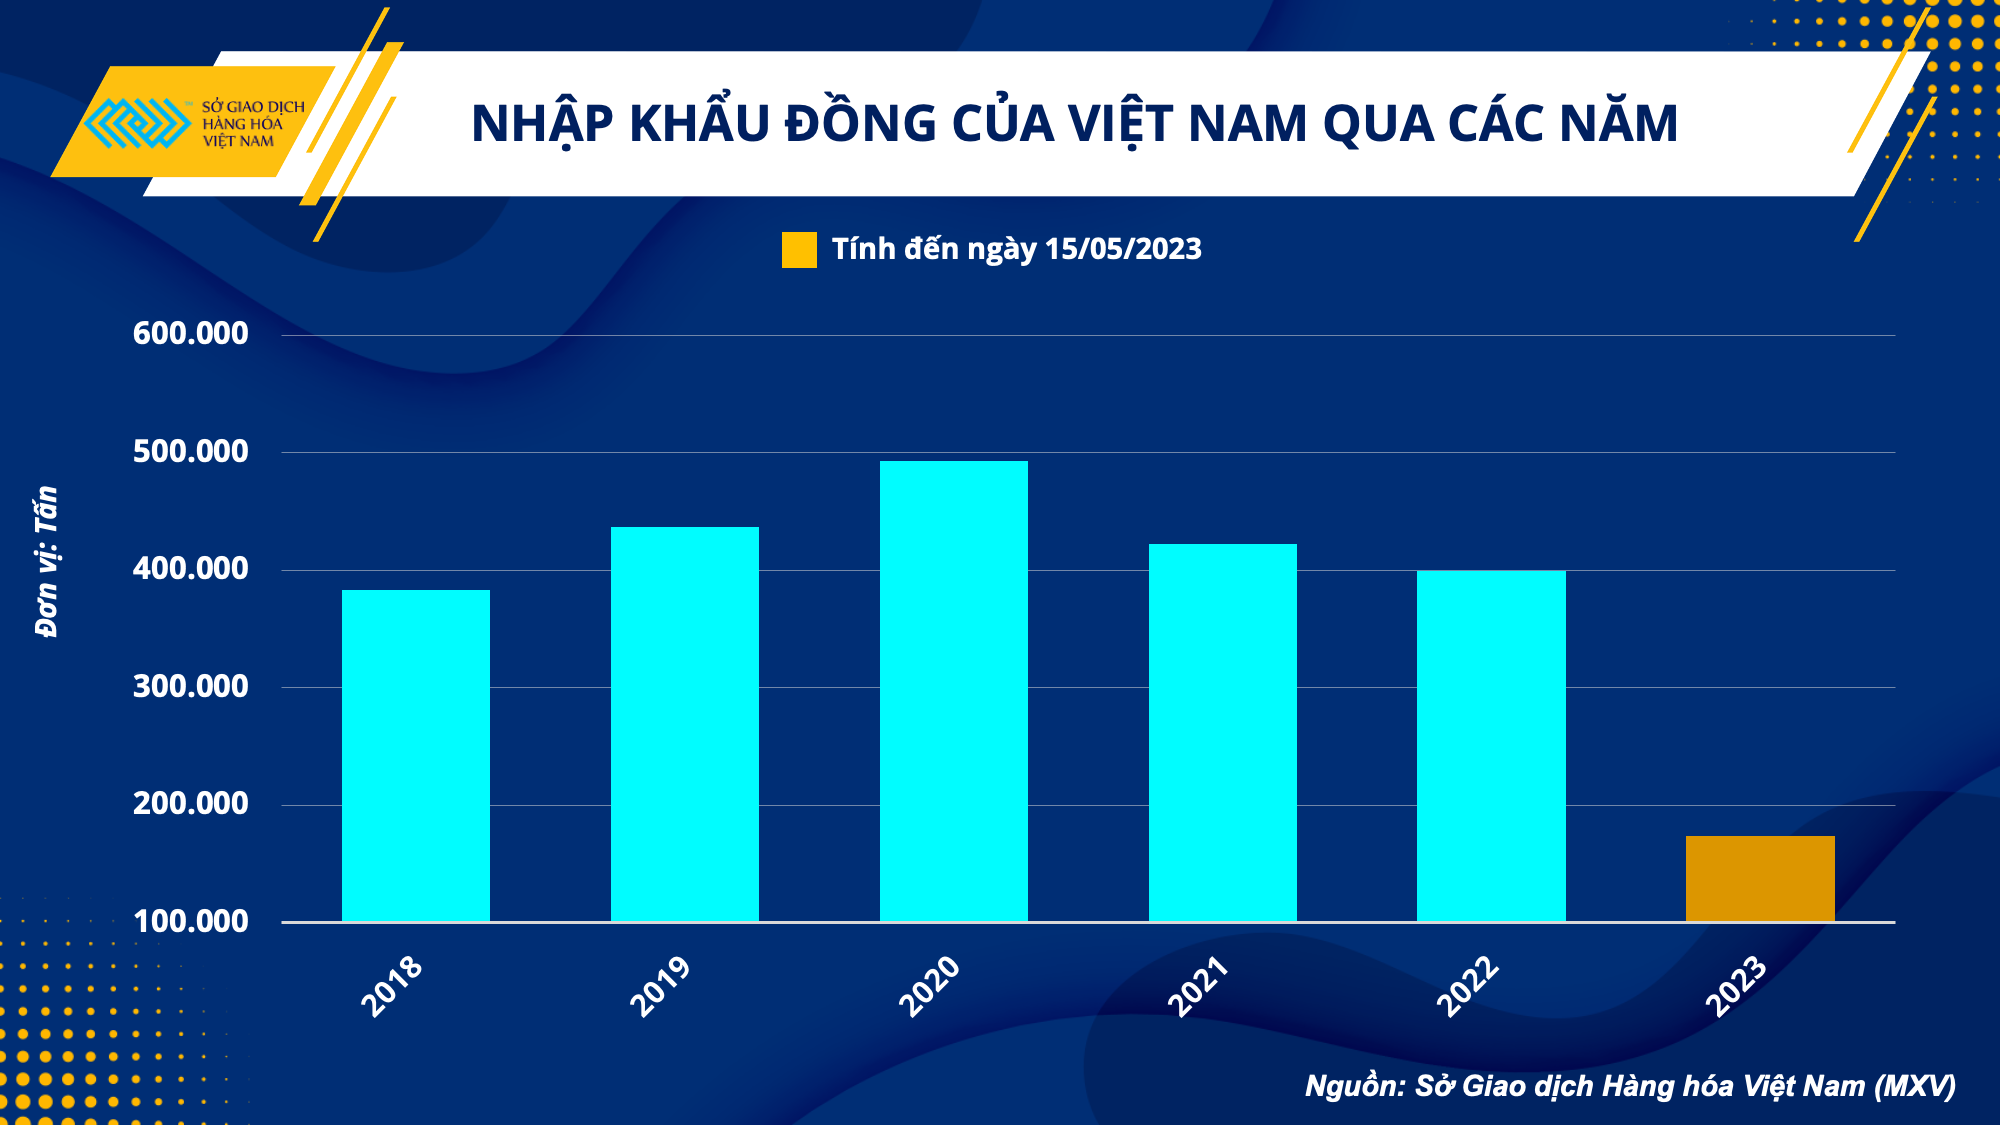 Copper price downtrend creates momentum for VN’s renewables